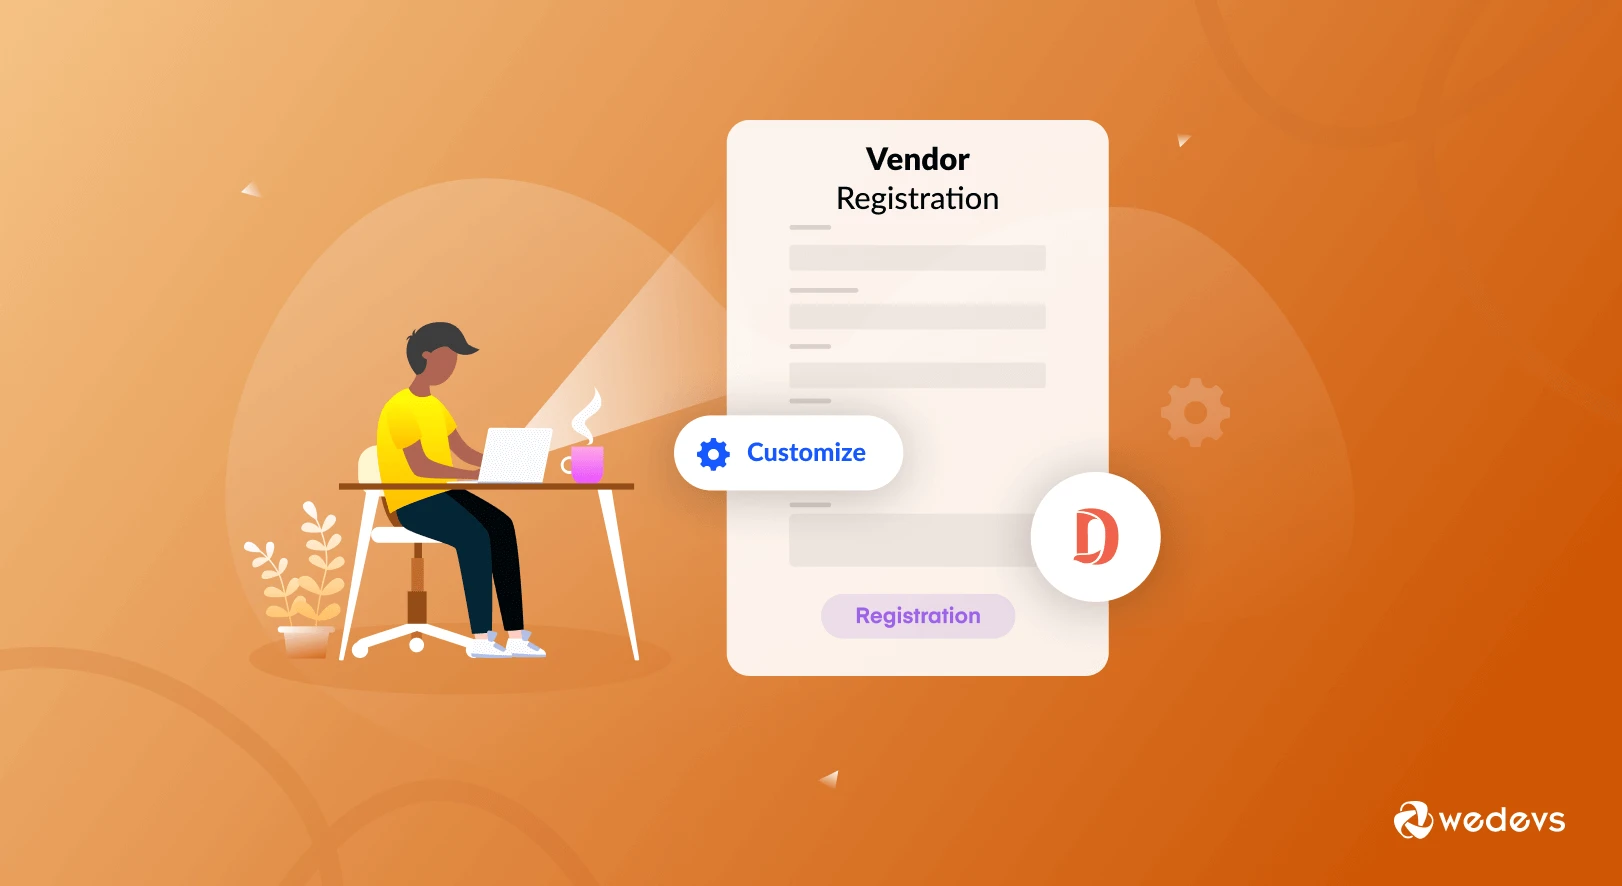 How to Customize a Vendor Registration Form in Dokan